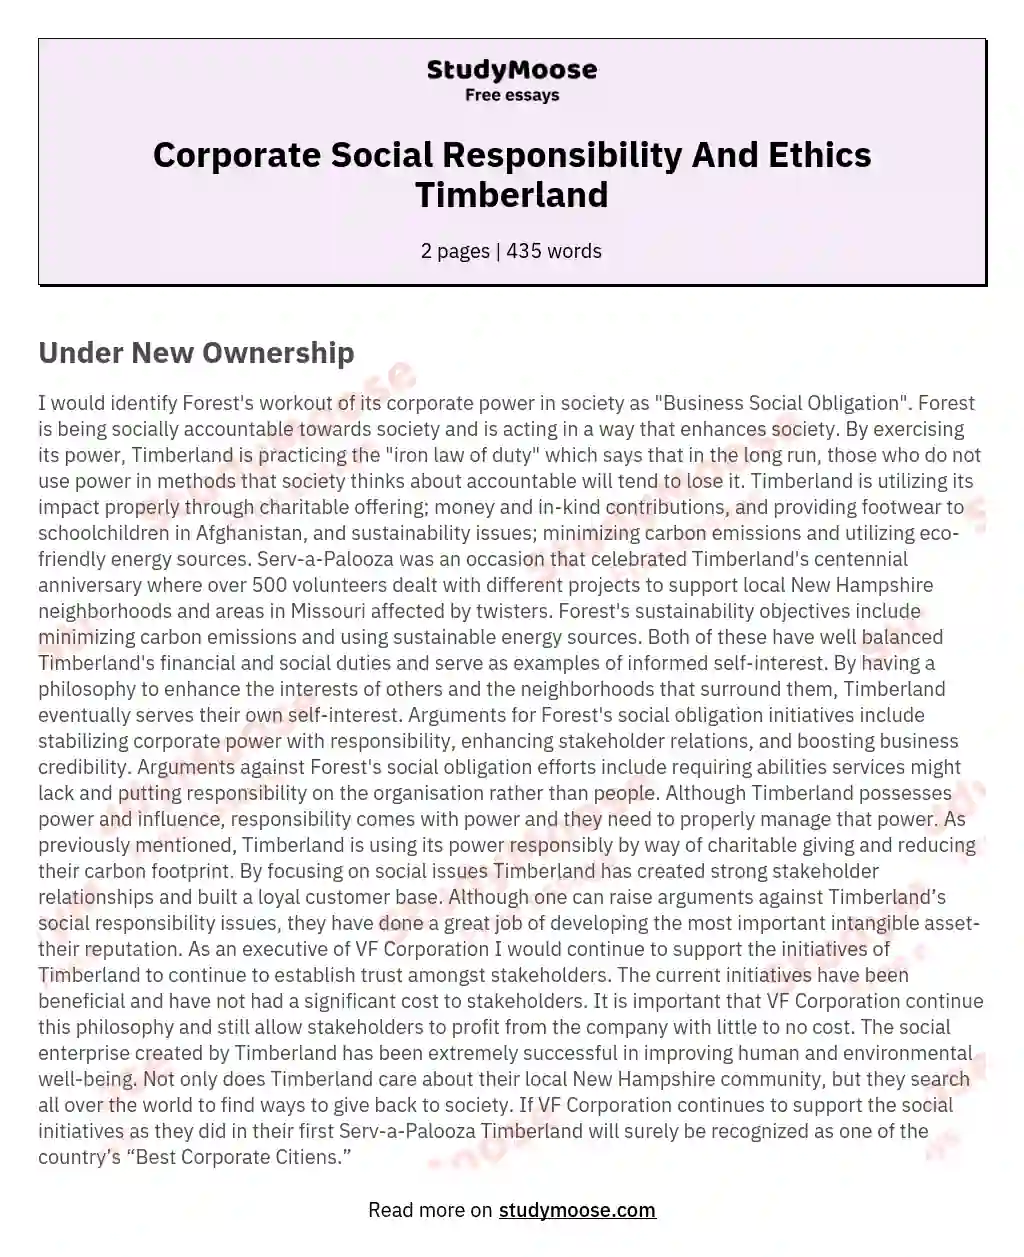 Corporate Social Responsibility And Ethics Timberland essay